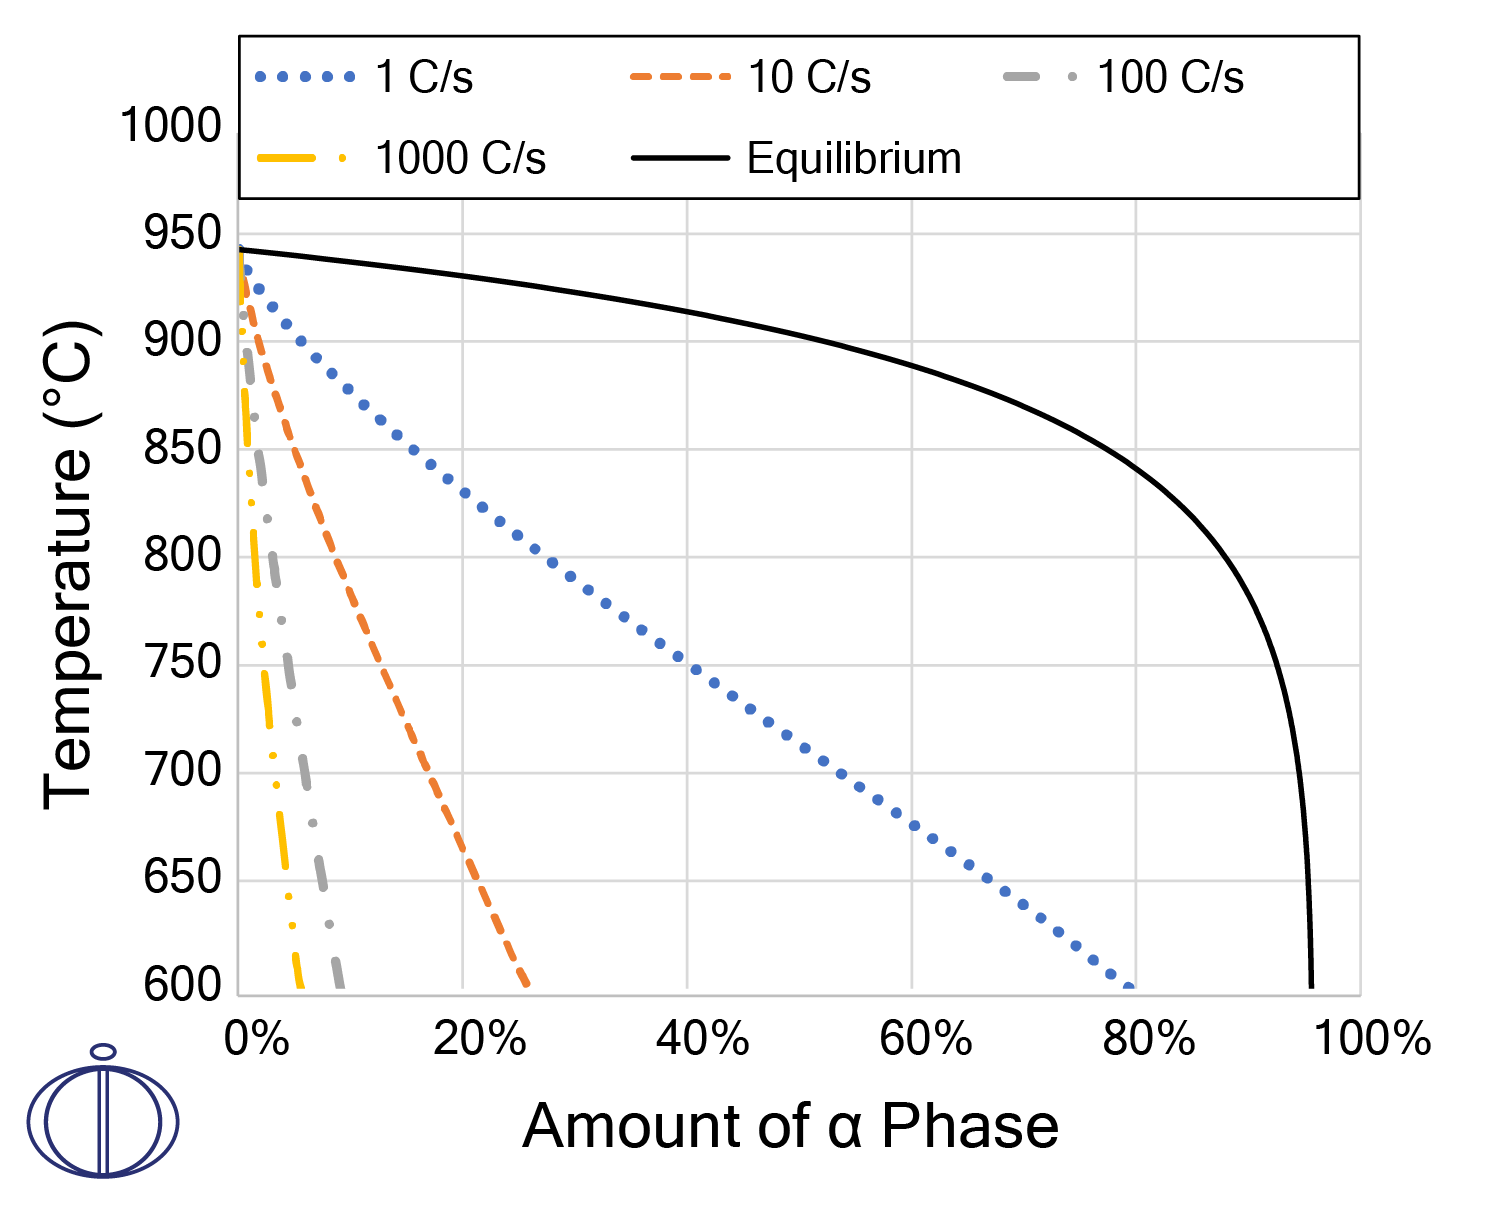 A plot showing the phase balance in Ti-6Al-4V as a function of different cooling rates.